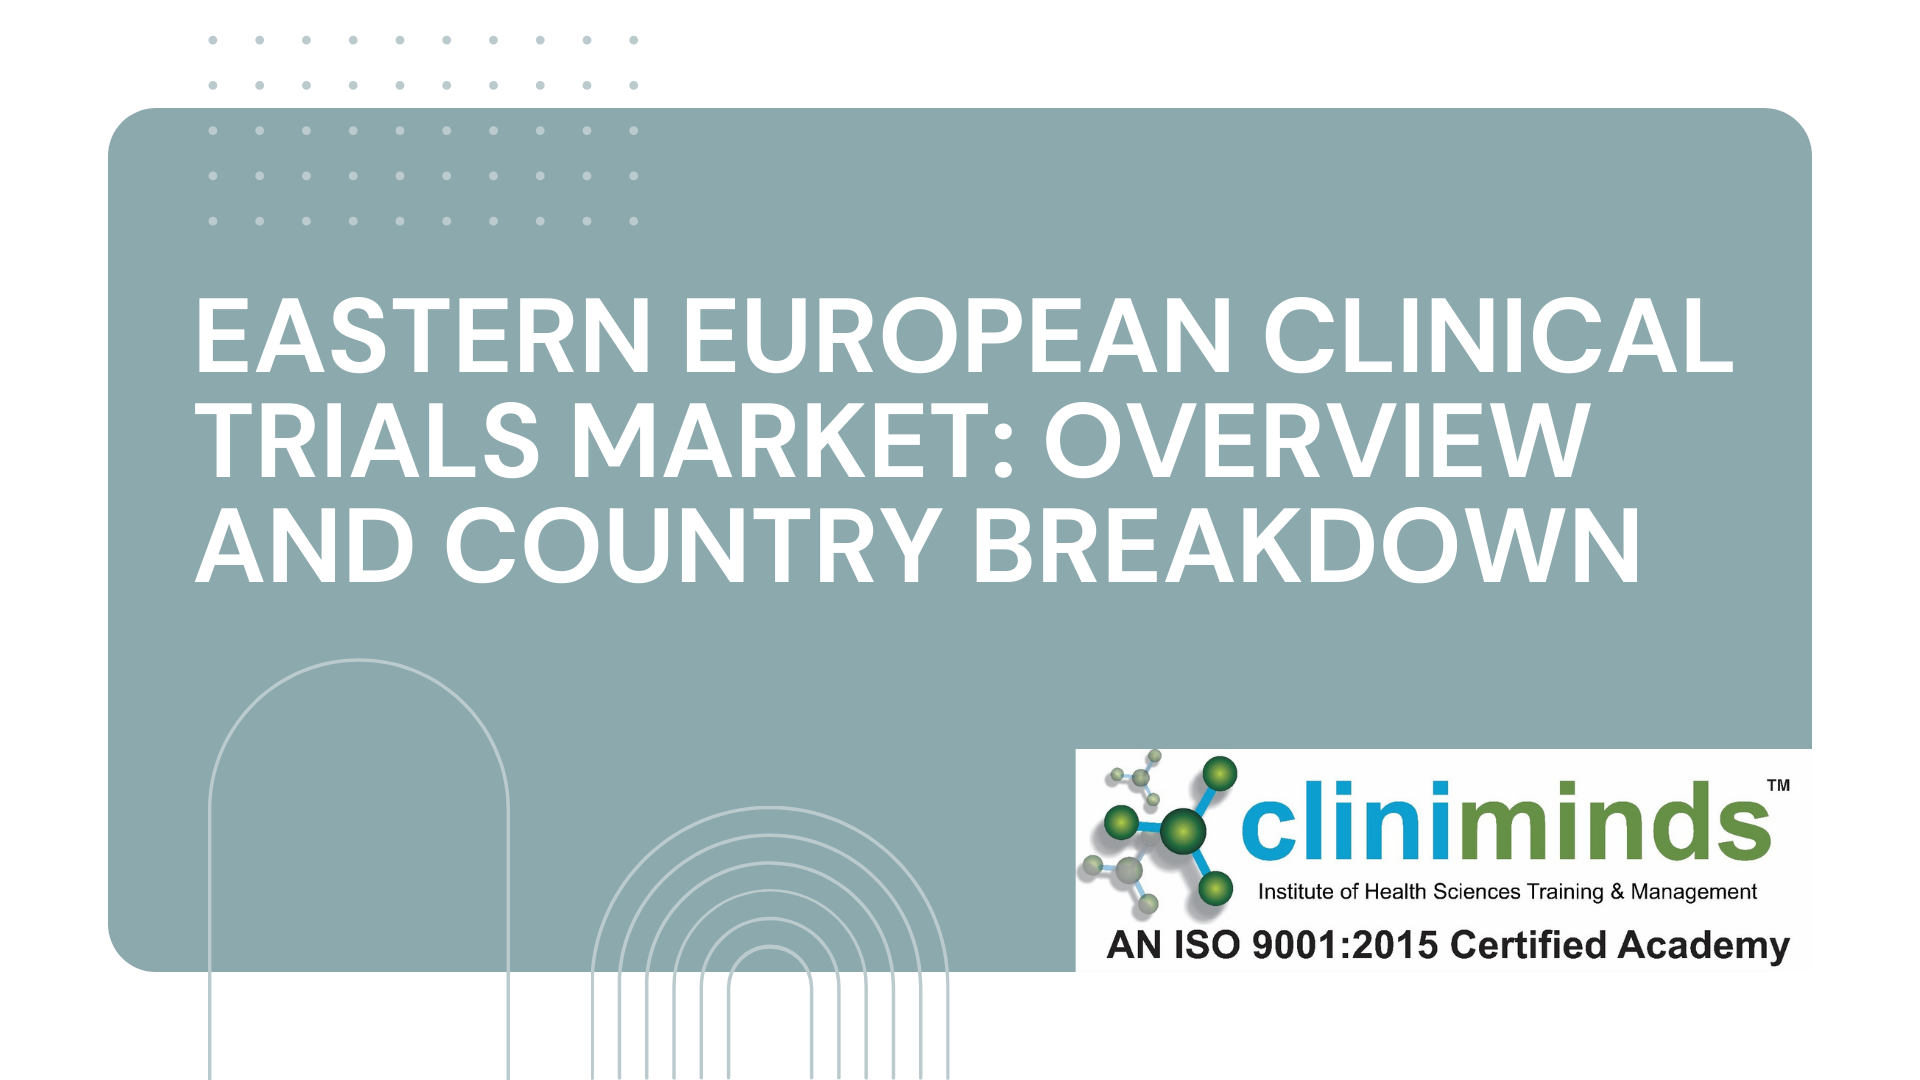 Eastern European Clinical Trials Market: Overview and Country Breakdown